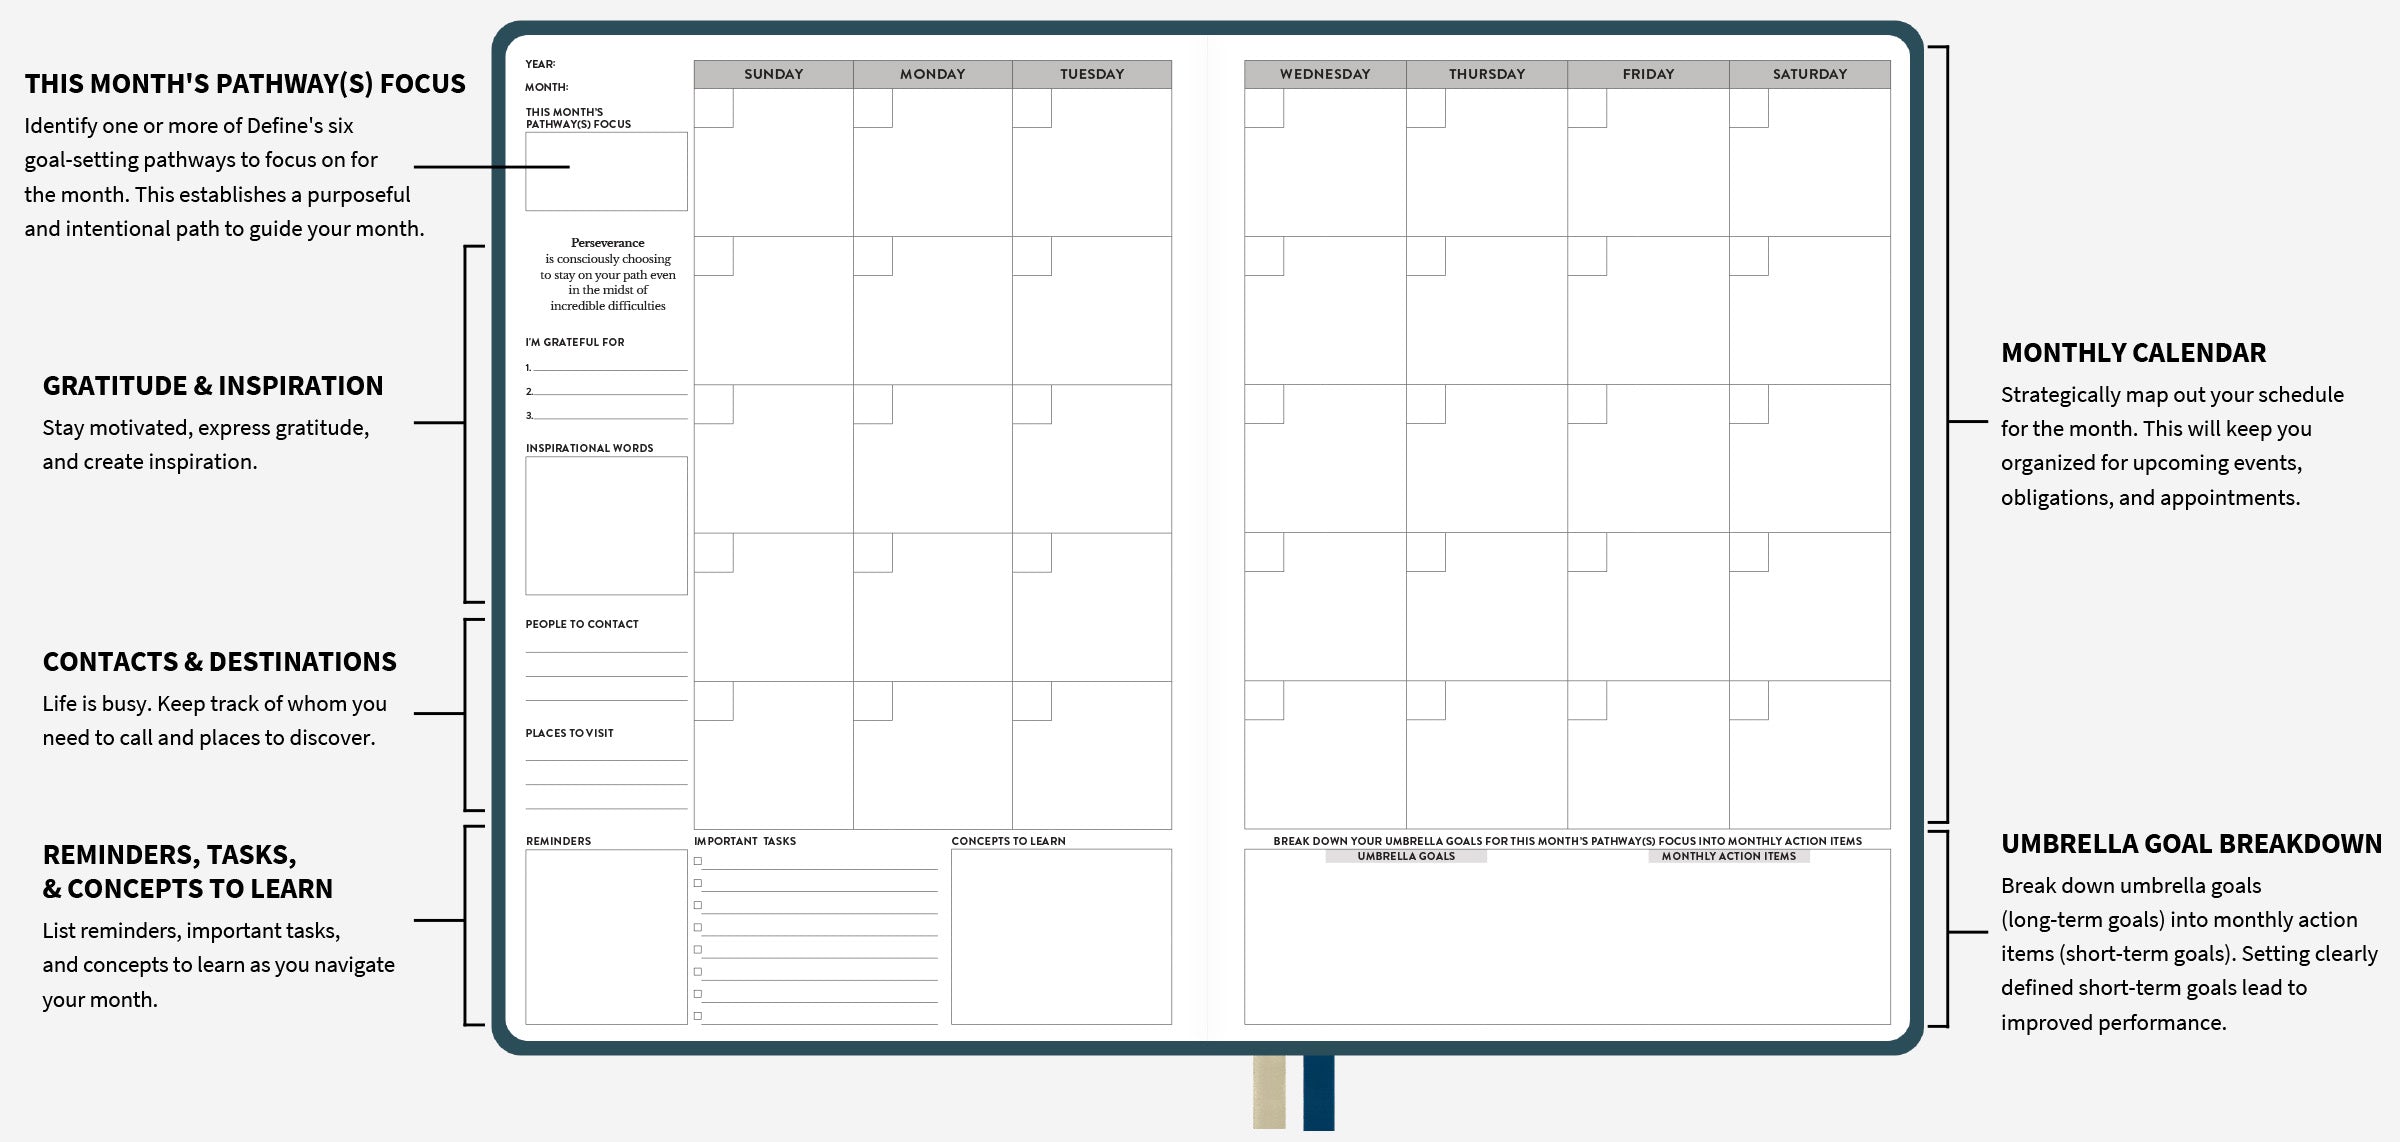 Example of the monthly layout in the undated planner